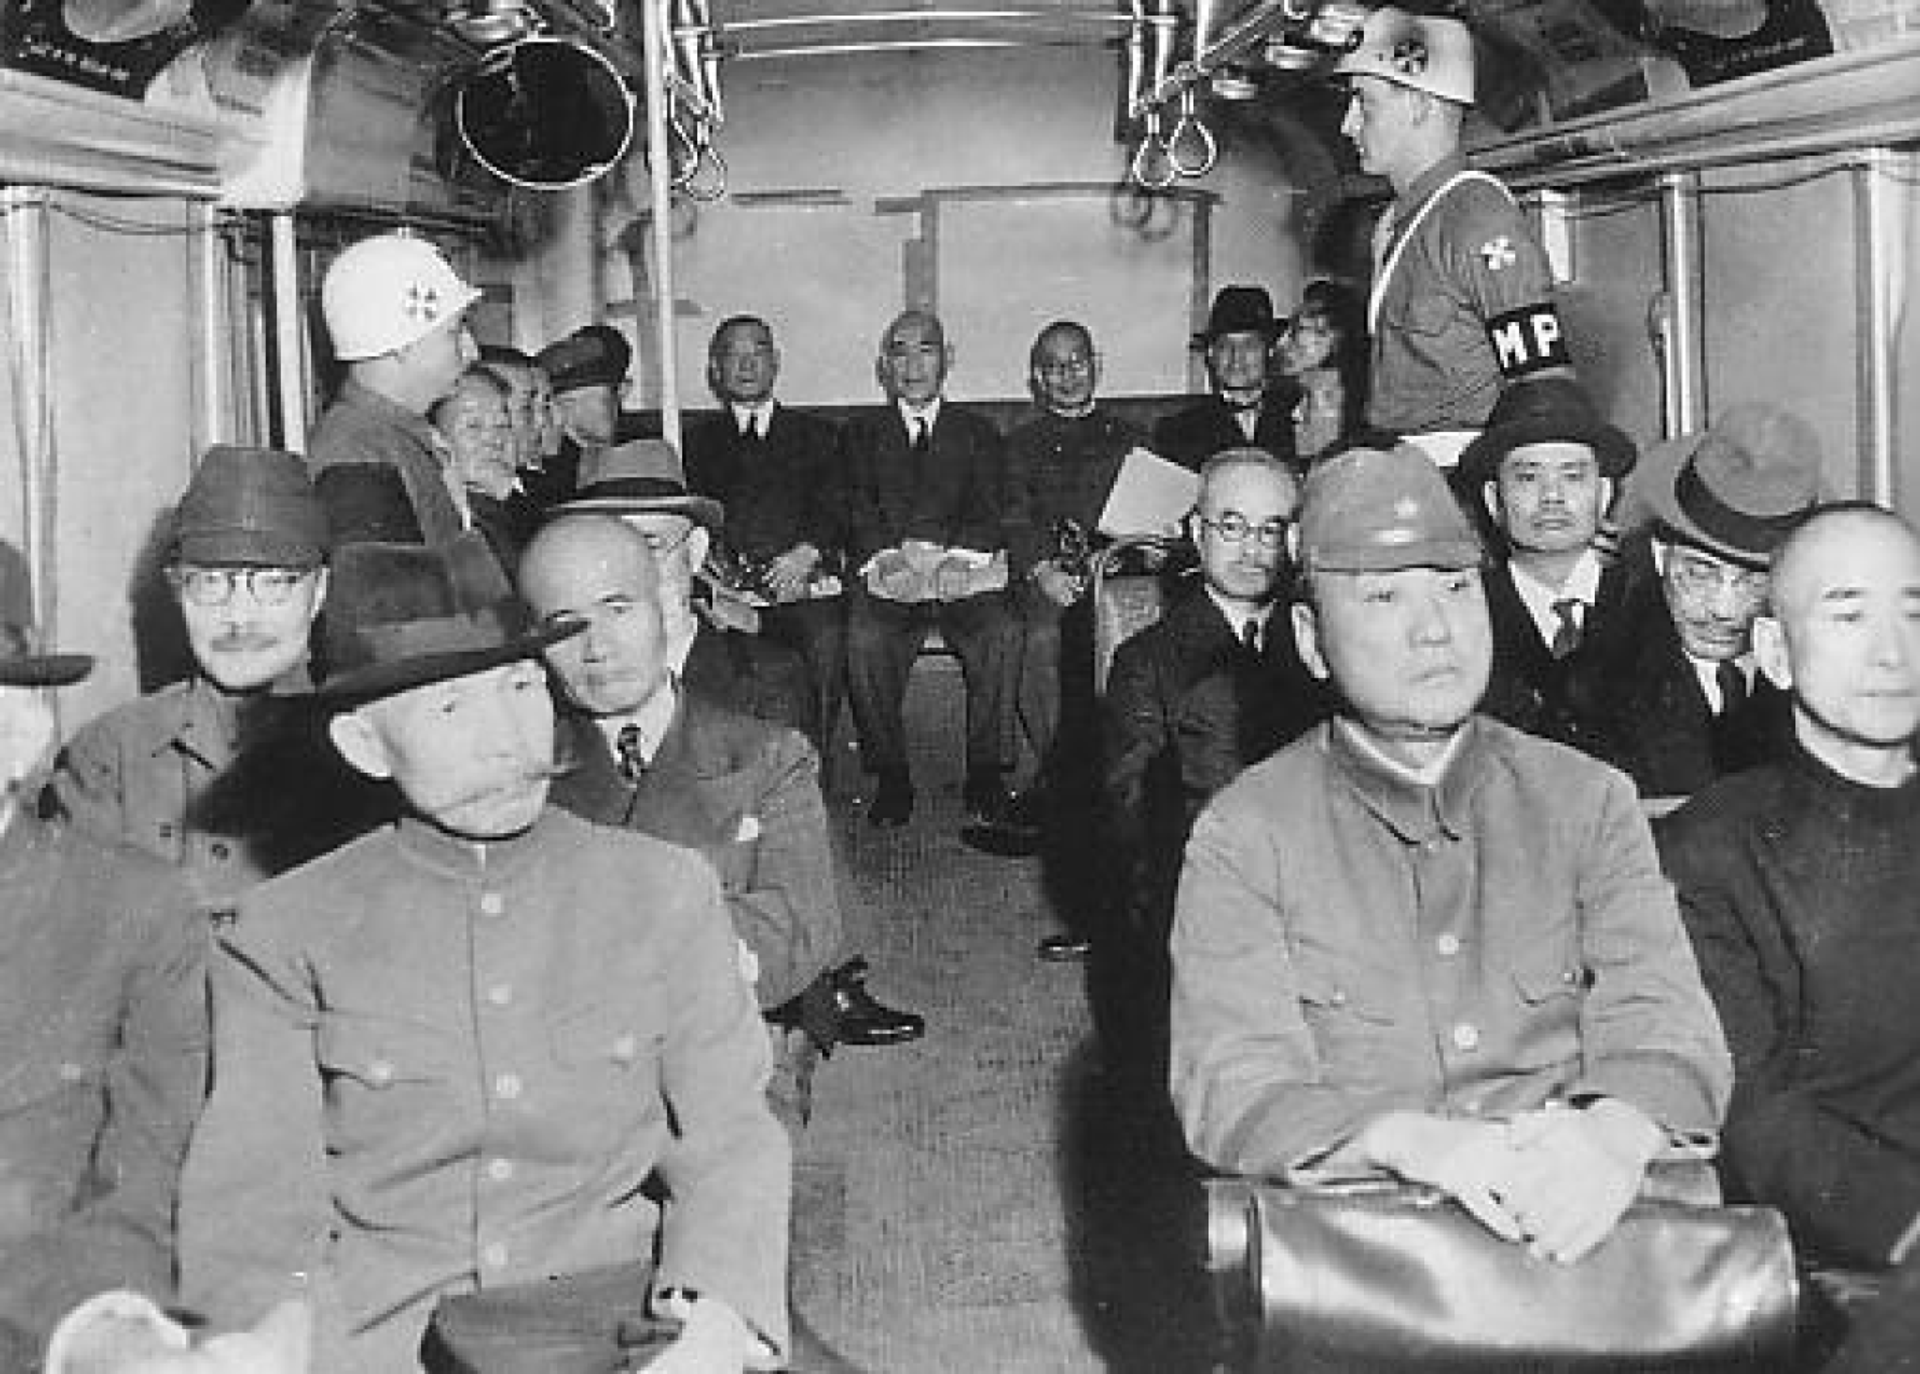 The 14 Class-A war criminals in a bus during the International Military Tribunal for the Far East (IMTFE), also known as the Tokyo Trials, 1946. Those in this category were accused of “planning, preparation, initiation, or waging of wars of aggression,” or conspiracy to those ends, and included some of Japan’s top military and civilian leadership during the war. - Sputnik International, 1920, 15.08.2022